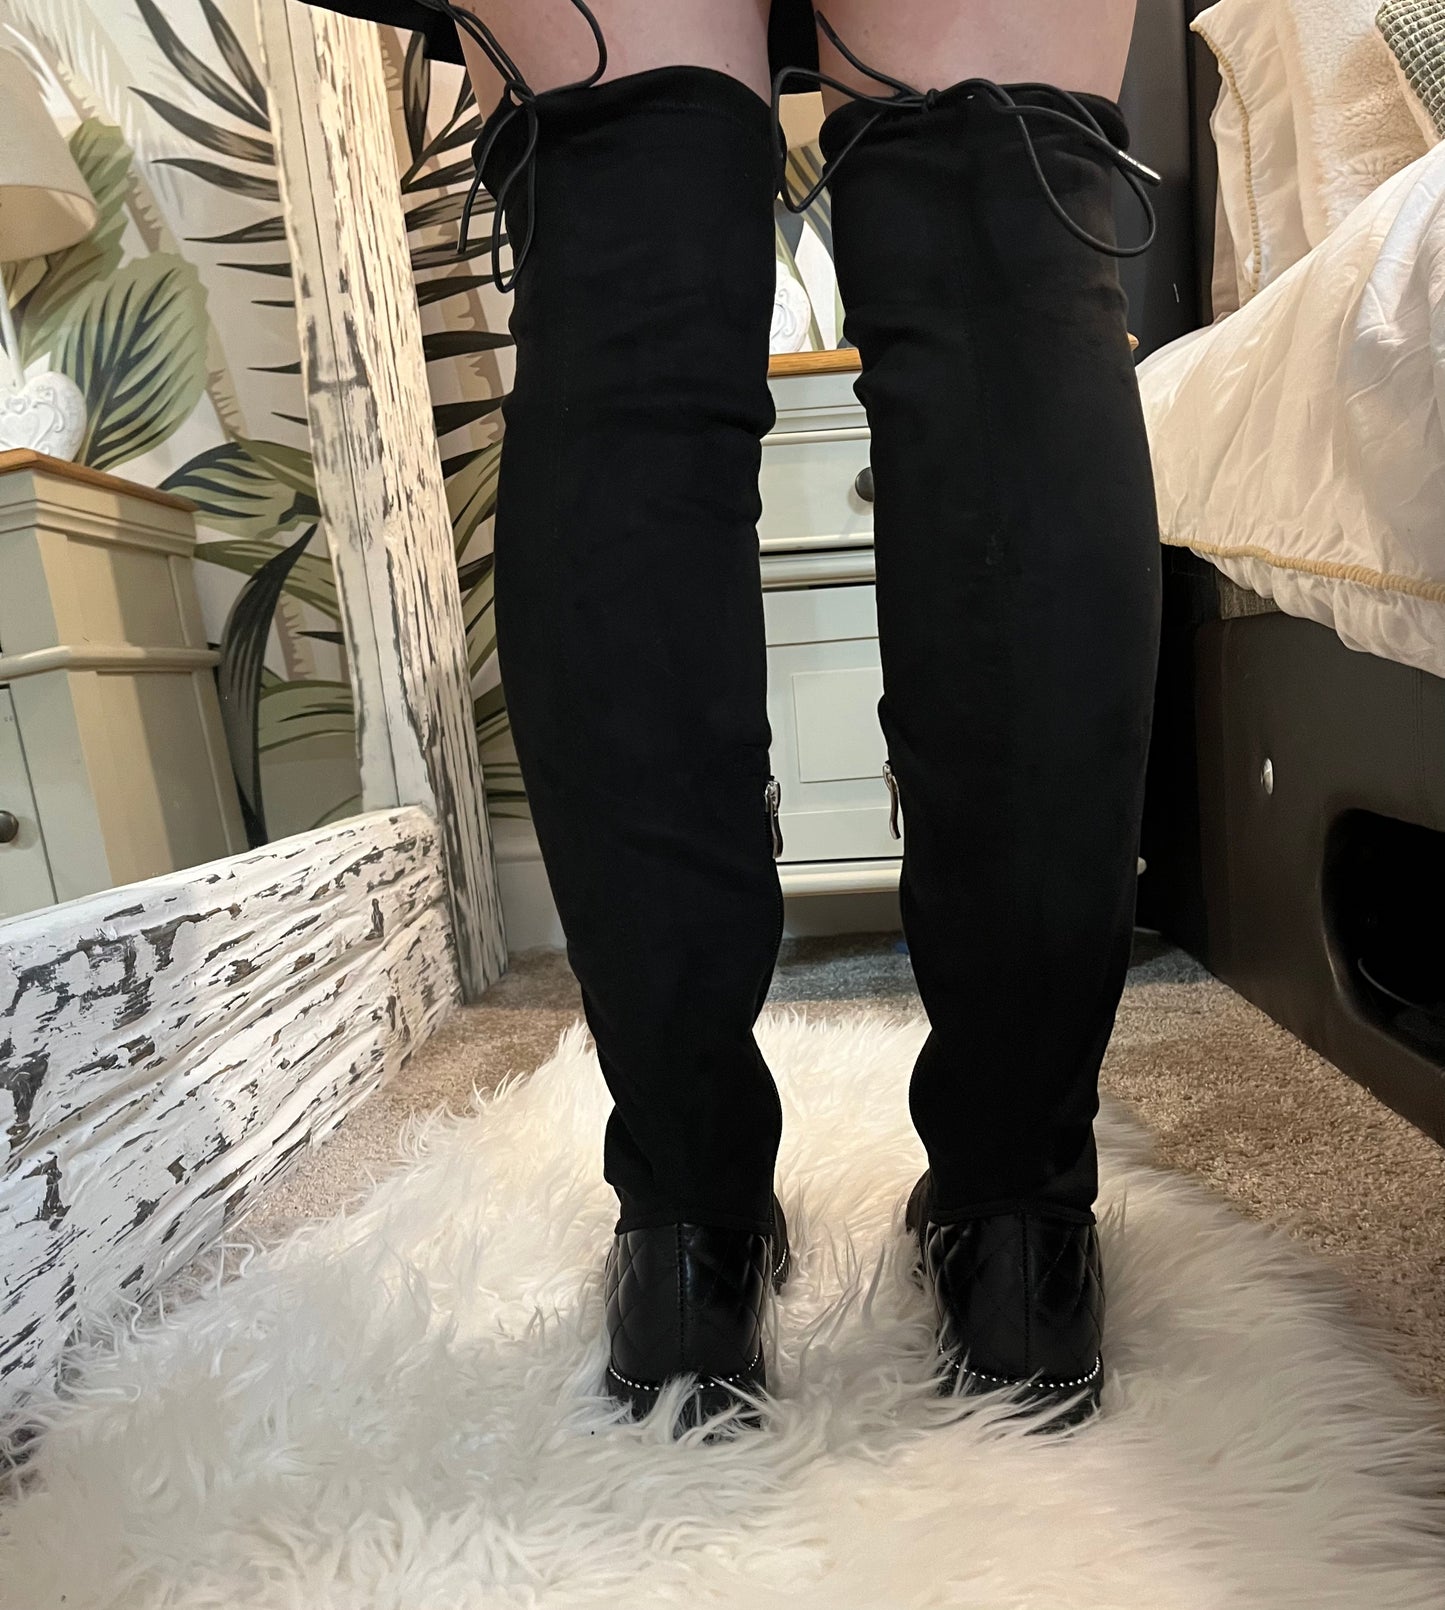 OVER THE KNEE TIE BOOTS